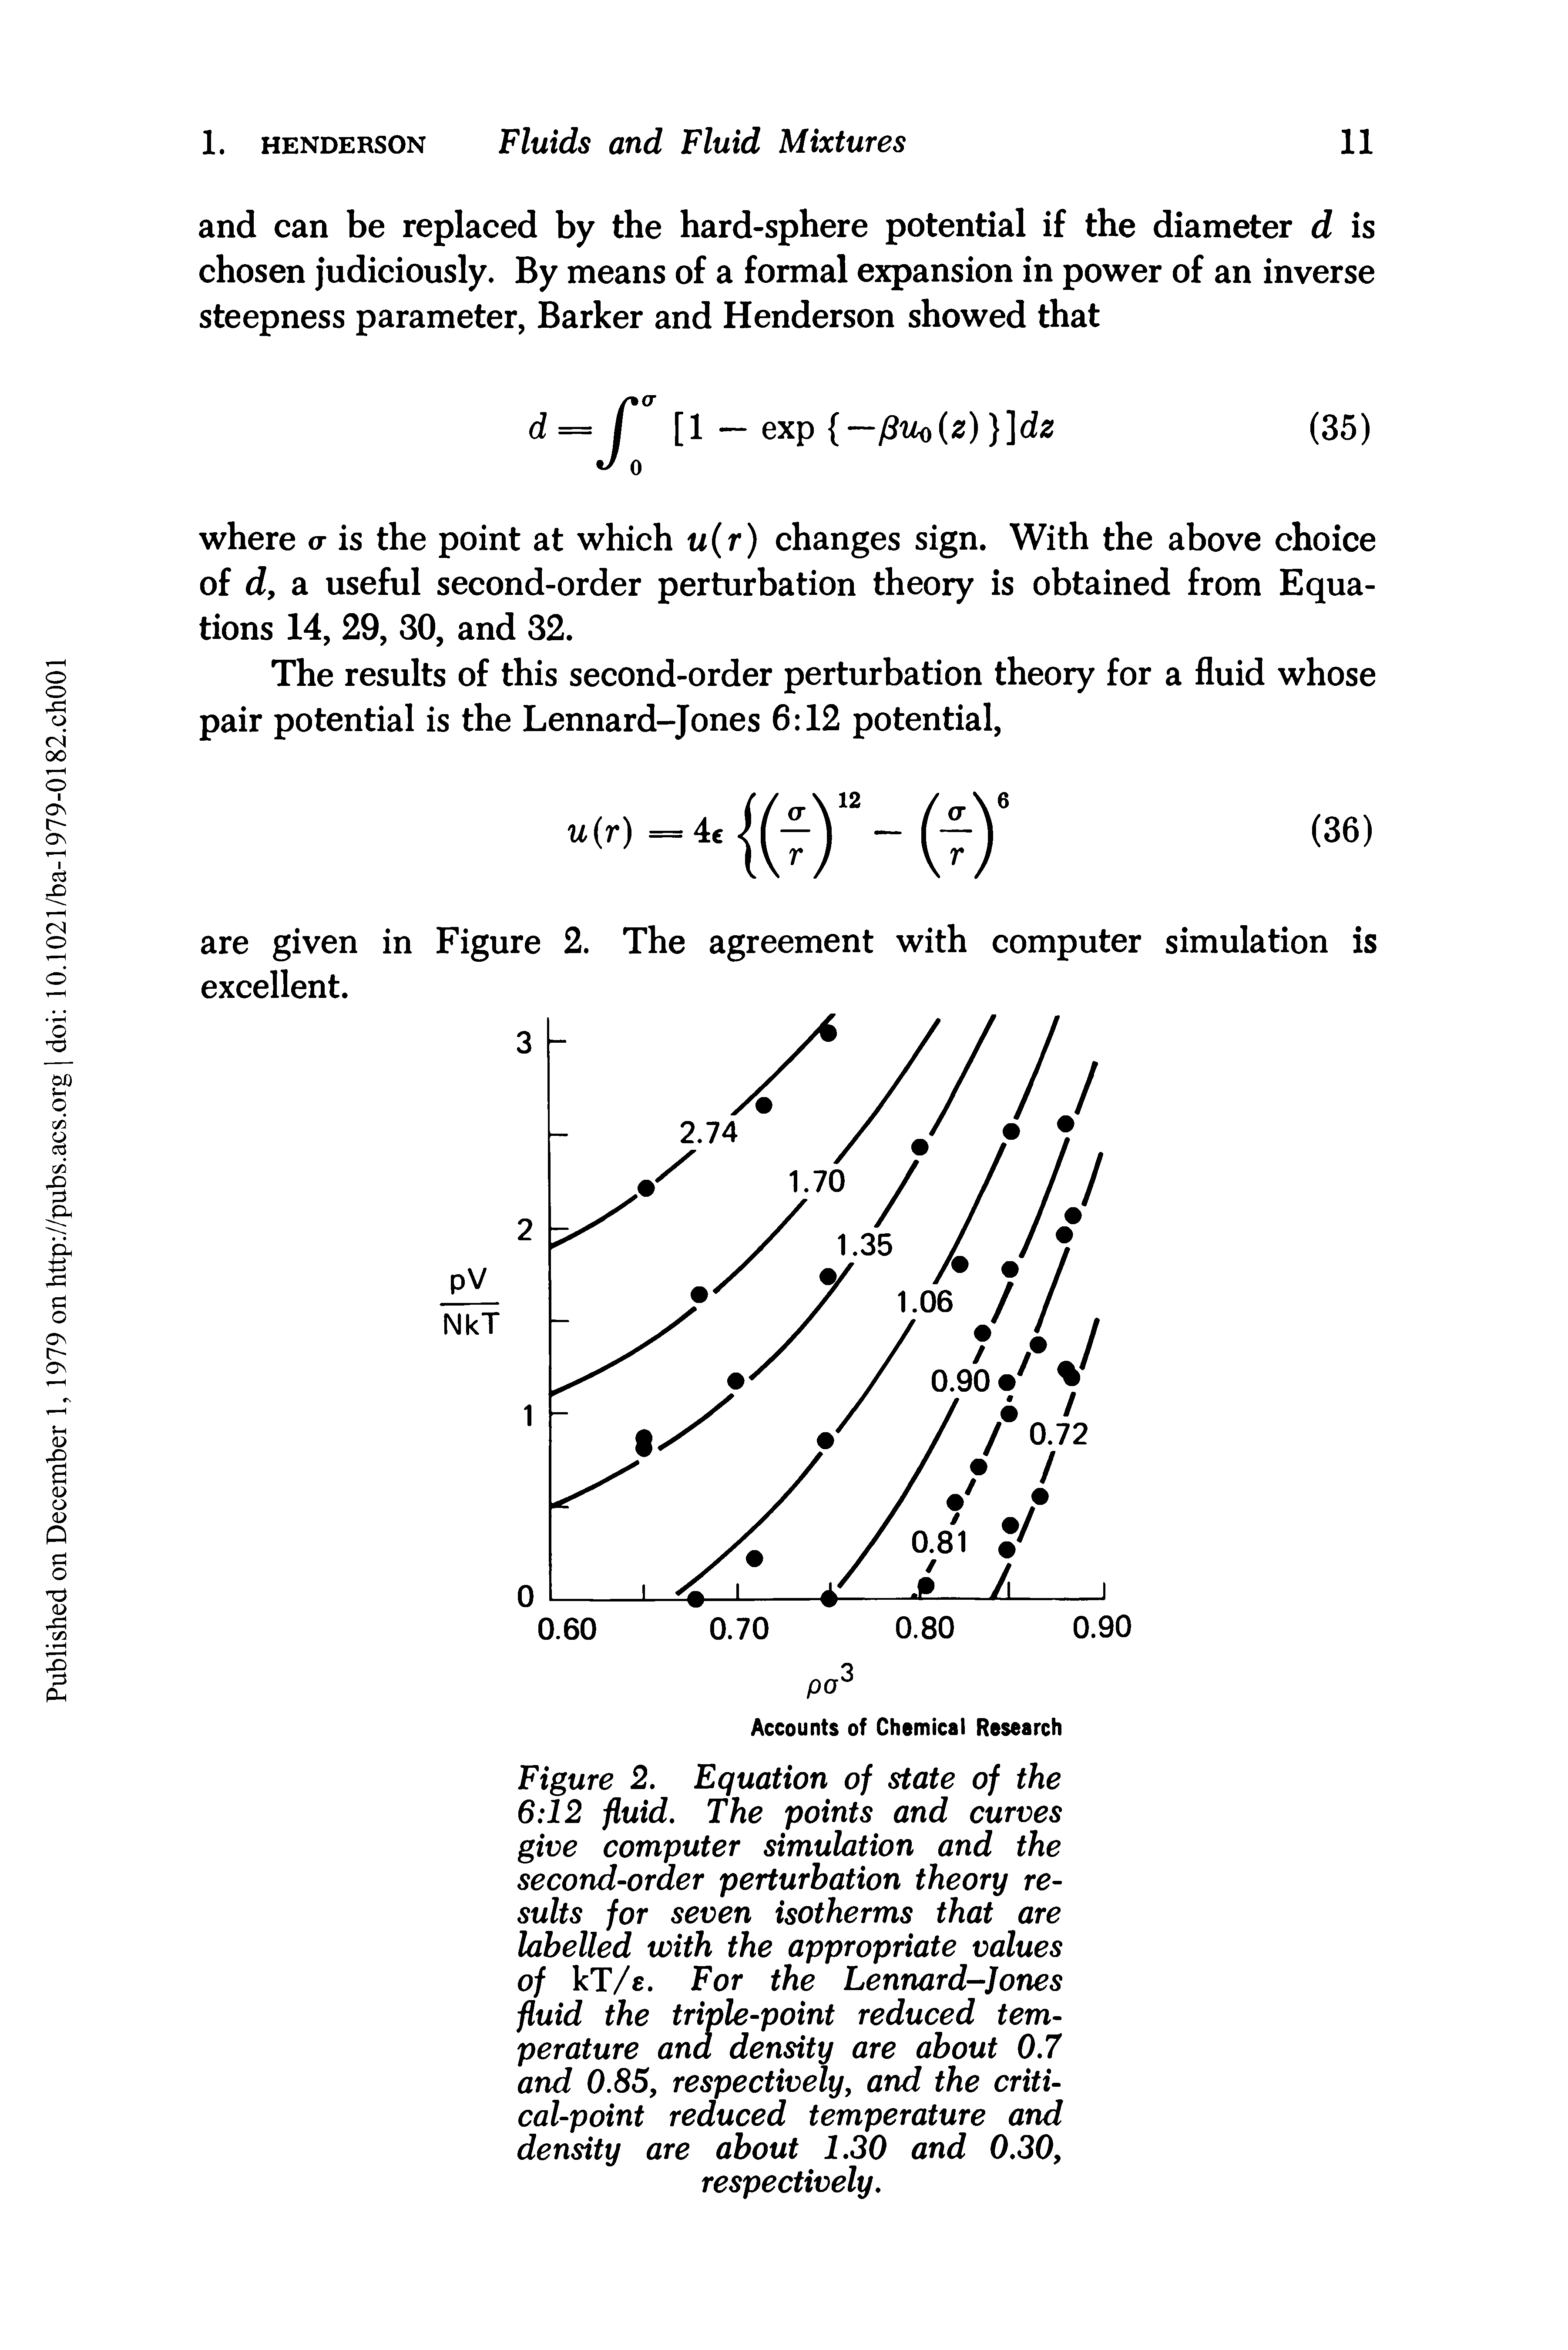 Figure 2. Equation of state of the 6 12 fluid. The points and curves give computer simulation and the second-order perturbation theory results for seven isotherms that are labelled with the appropriate values of kT/e. For the Lennard-Jones fluid the triple-point reduced temperature ana density are about 0.7 and 0.85, respectively, and the critical-point reduced temperature and density are about 1.30 and 0.30, respectively.